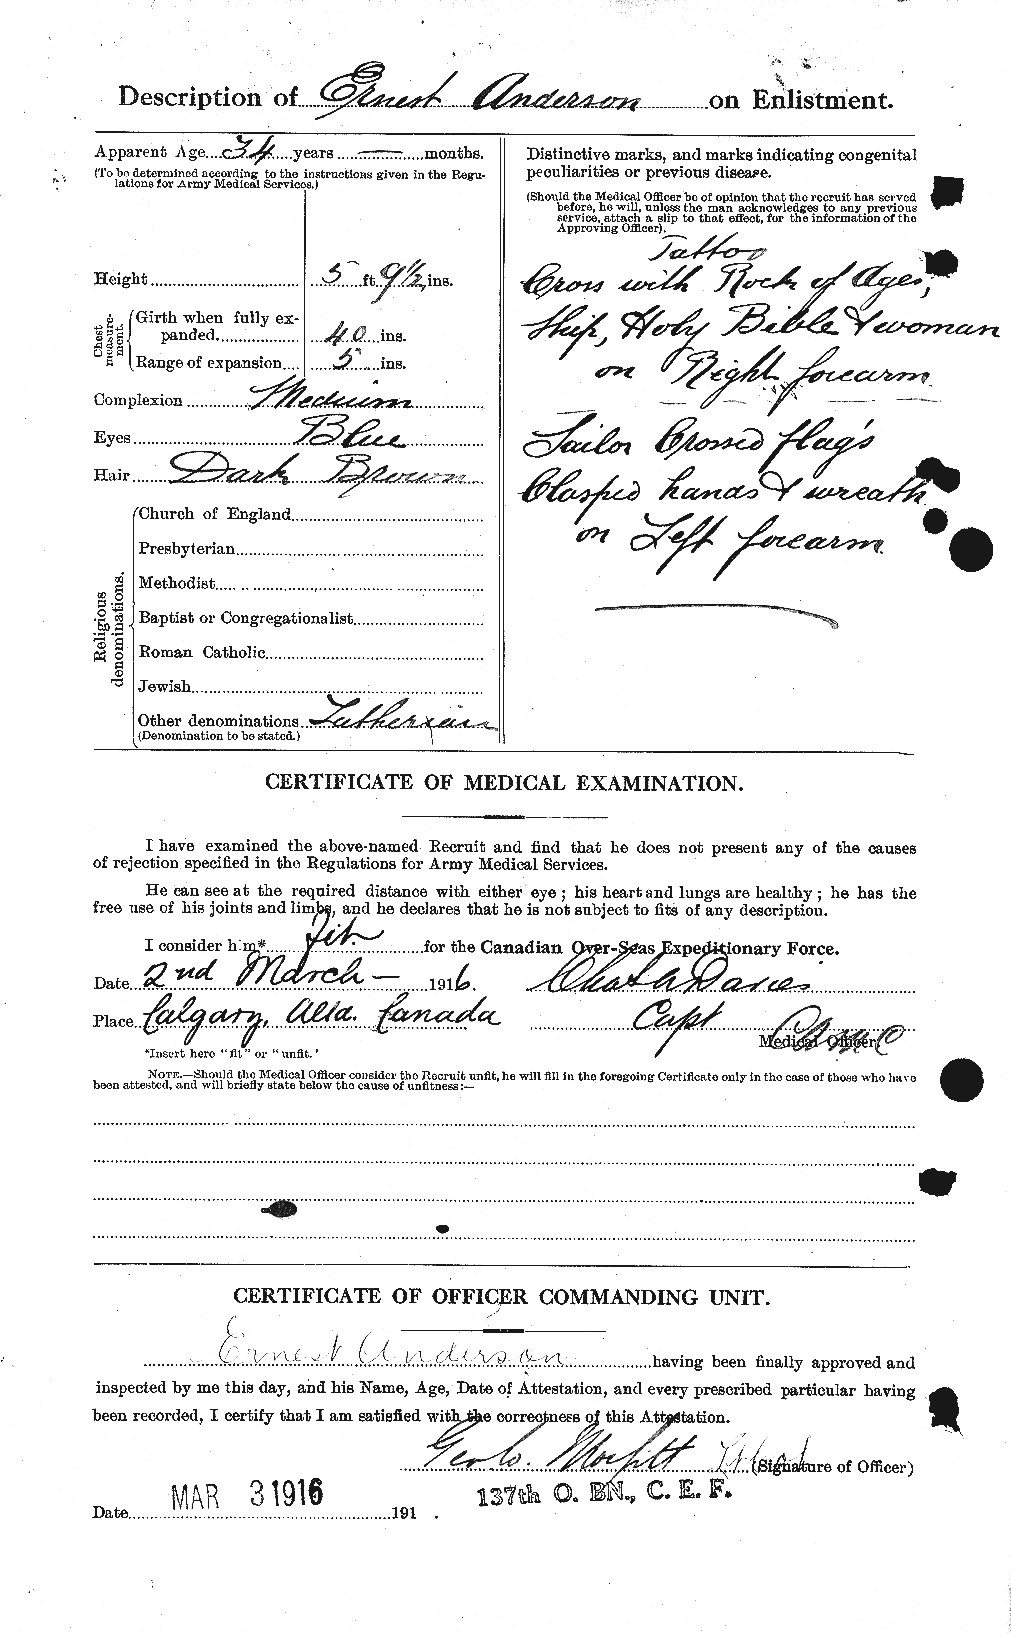 Personnel Records of the First World War - CEF 209890b